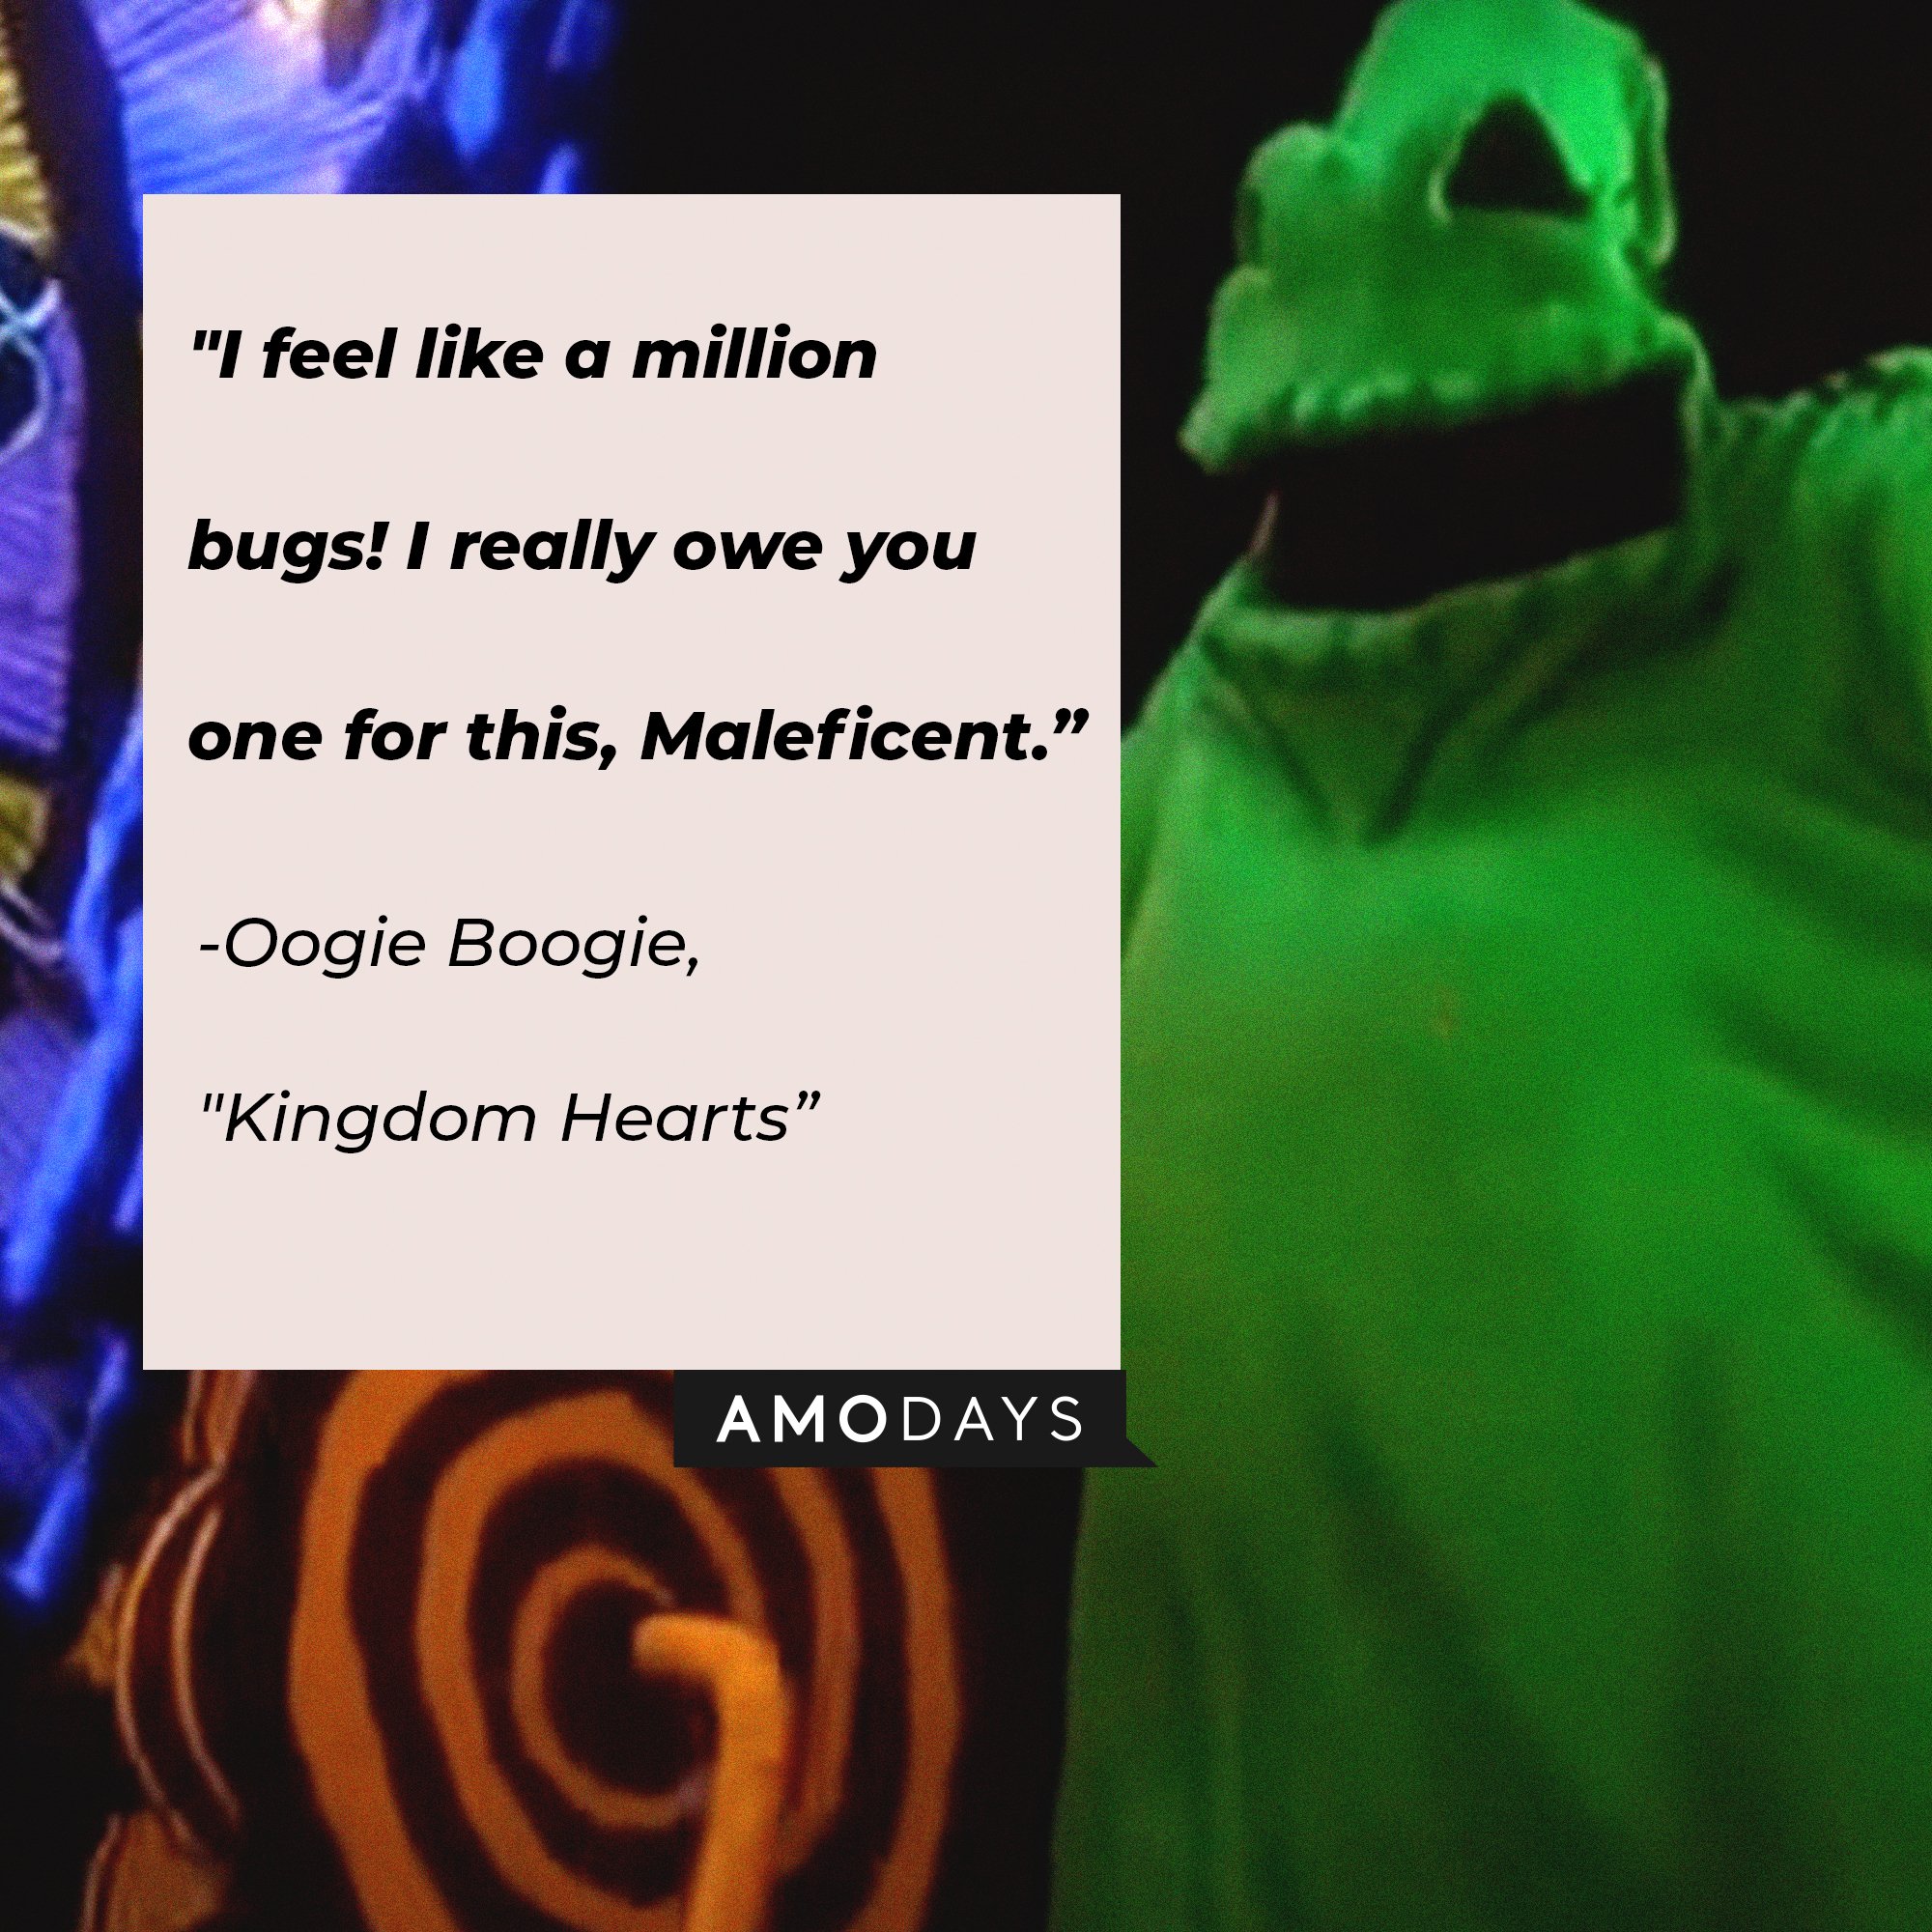 Oogie Boogie’s quote from "Kingdom Hearts: "I feel like a million bugs! I really owe you one for this, Maleficent.” | Image: AmoDays